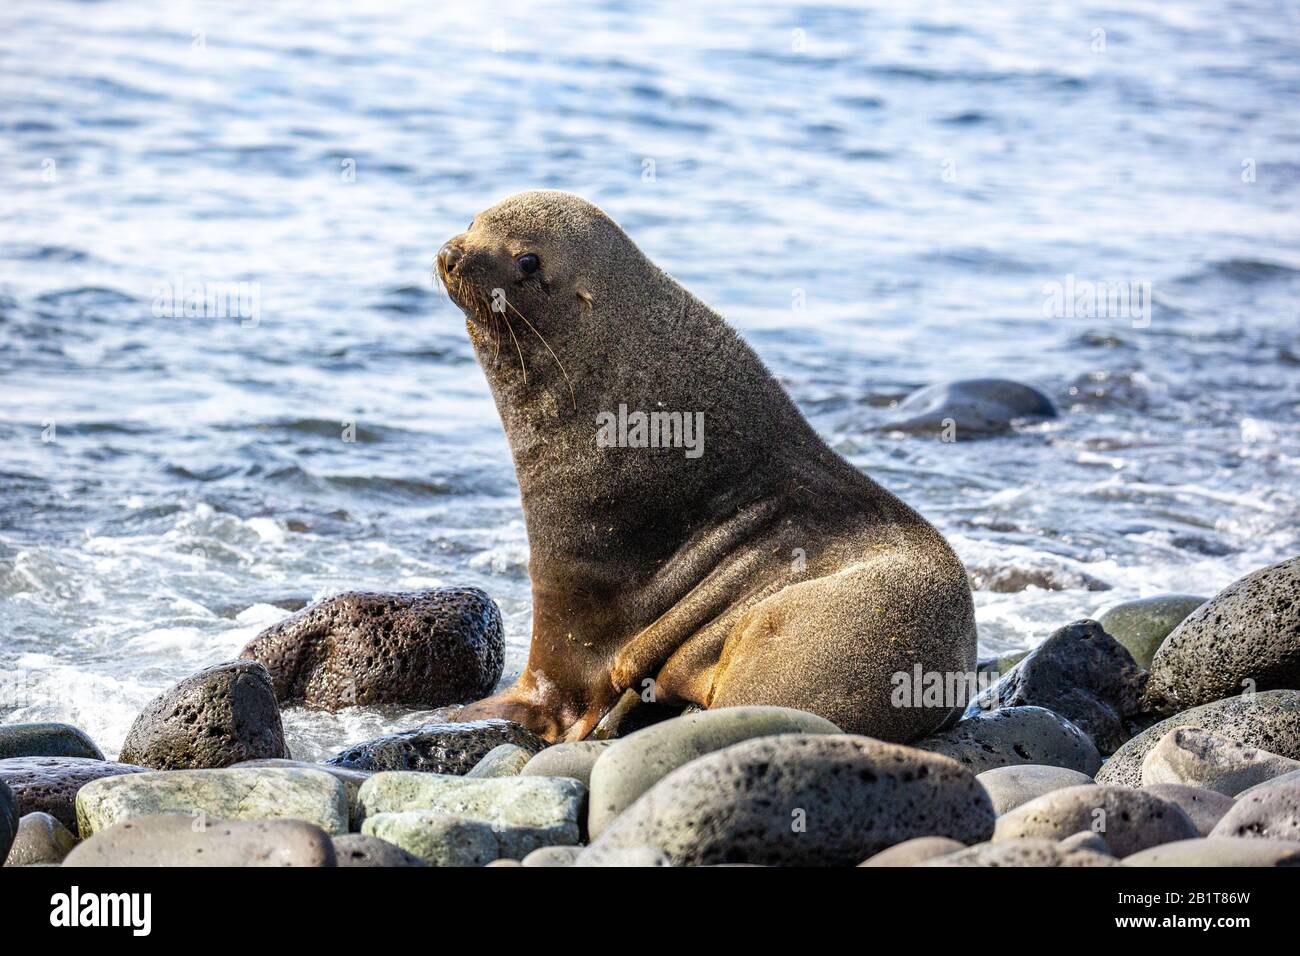 Antarctic fur seal (Arctocephalus gazella) on rocky coast. The female and juveniles are much smaller than the large males, and have a grey pelt with a Stock Photo